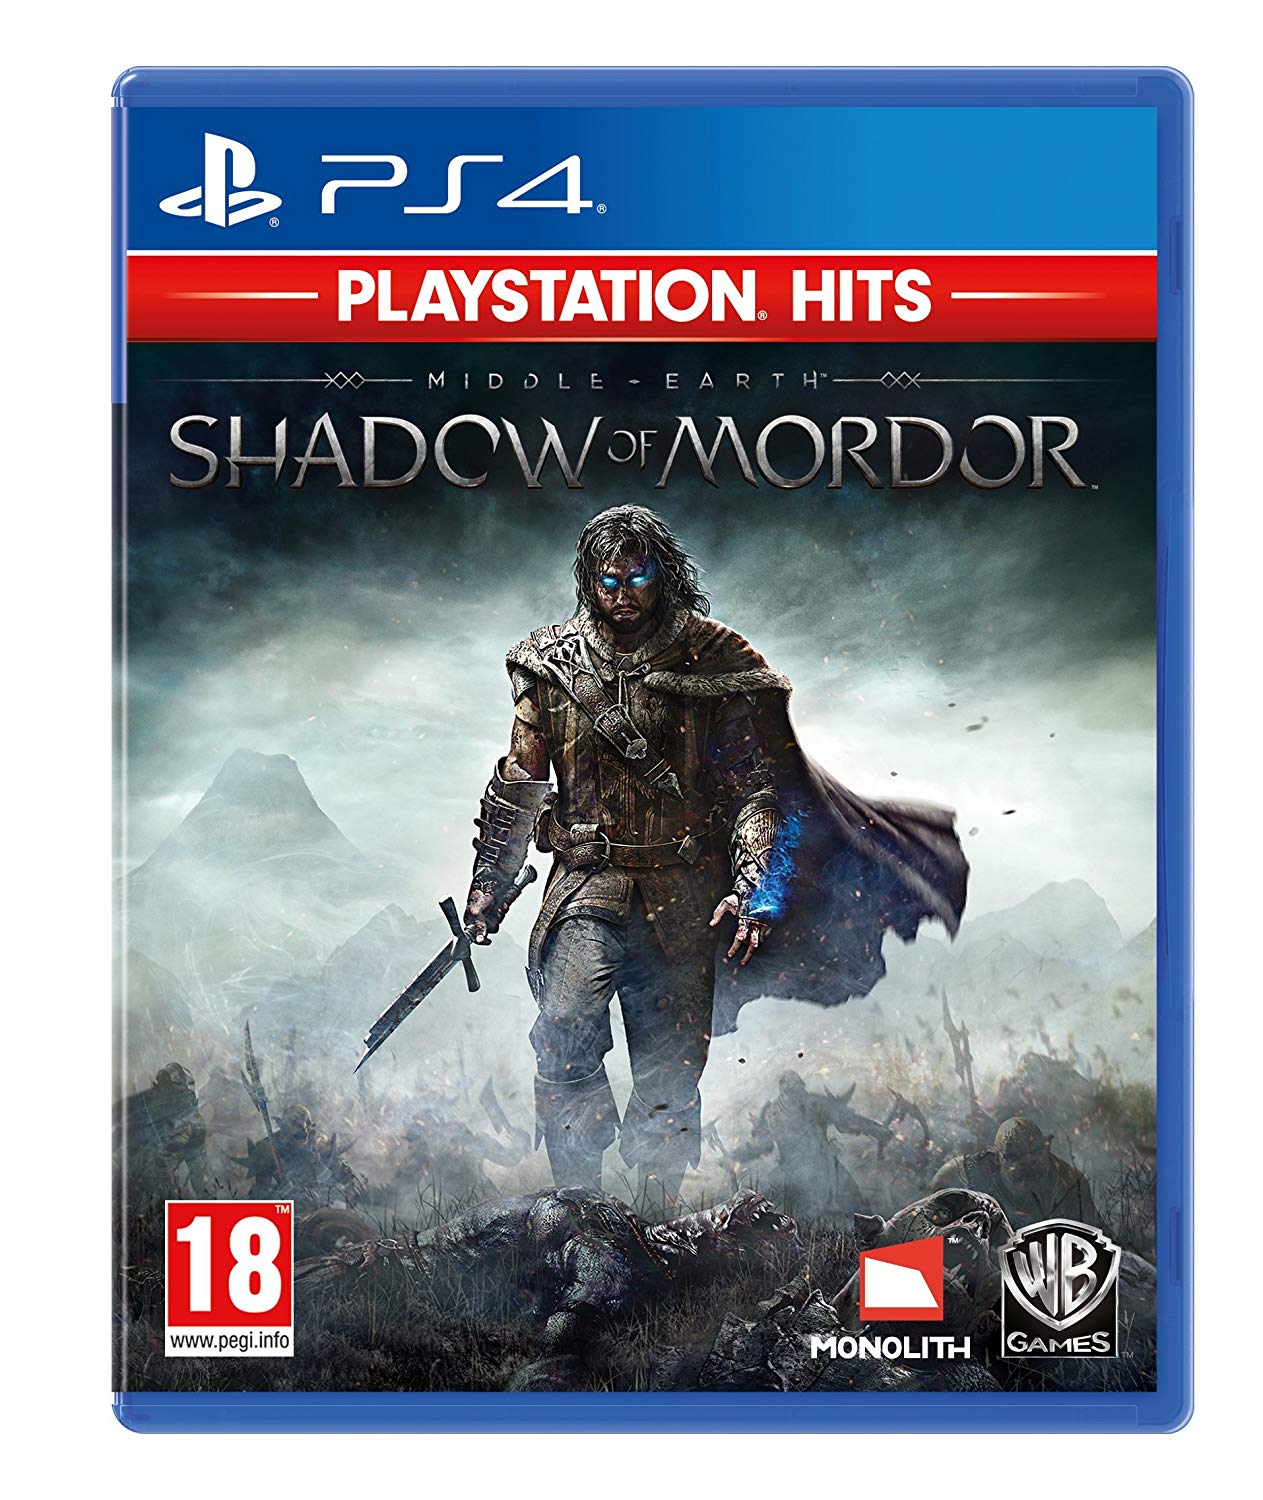 Middle Earth Shadow of Mordor (PlayStation Hits)